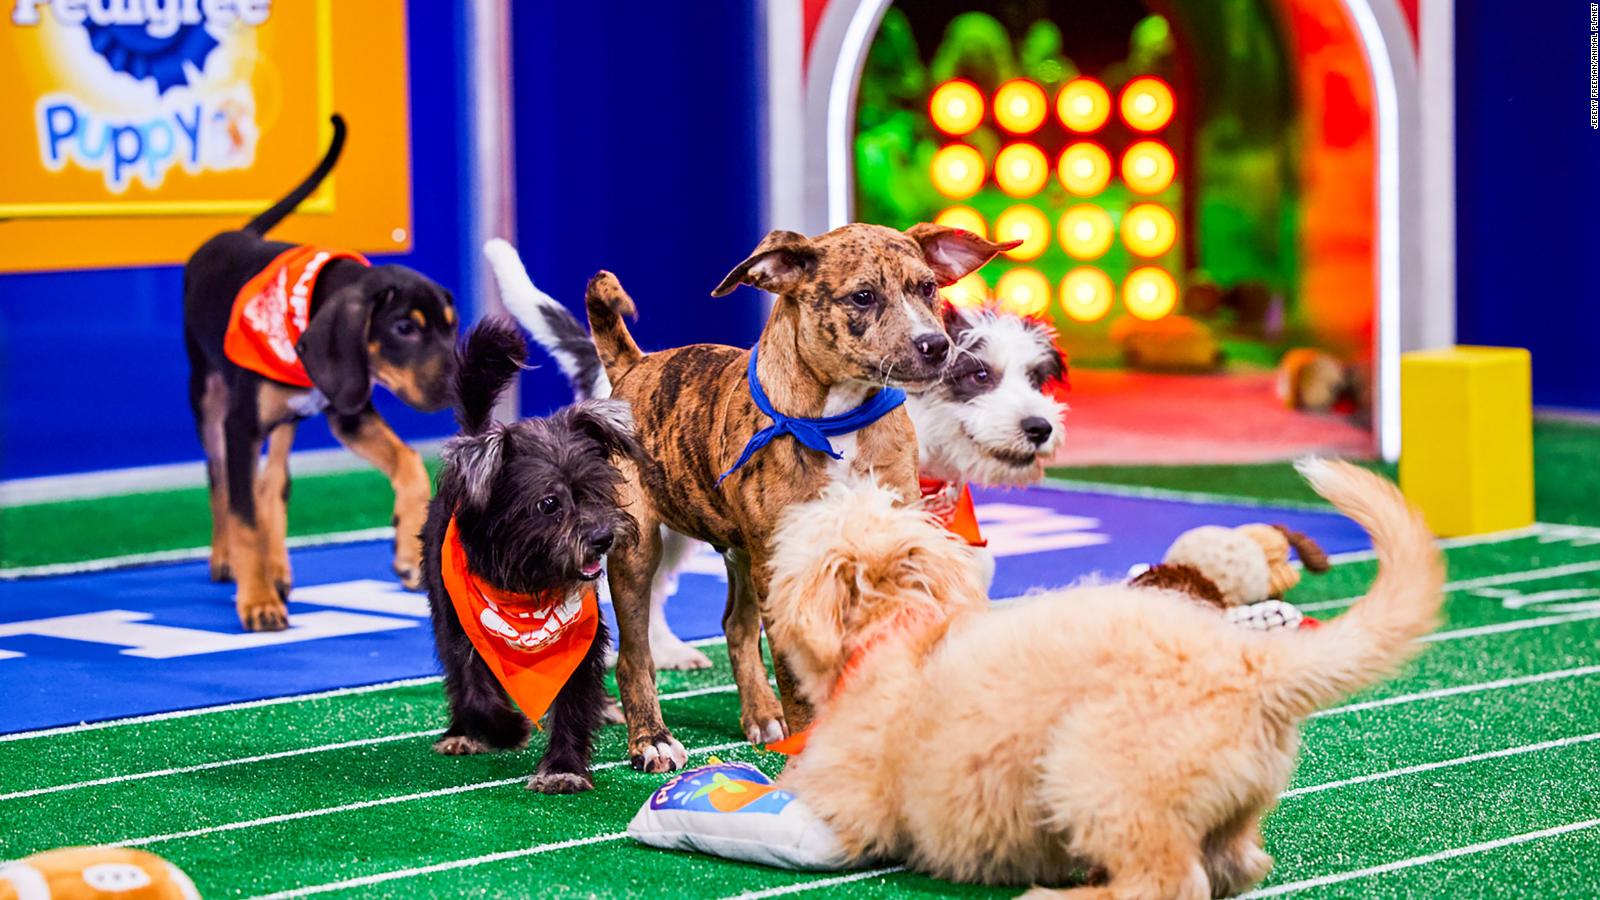 Puppy Bowl Referee Explains Why Event Helps Raise Awareness About Dog